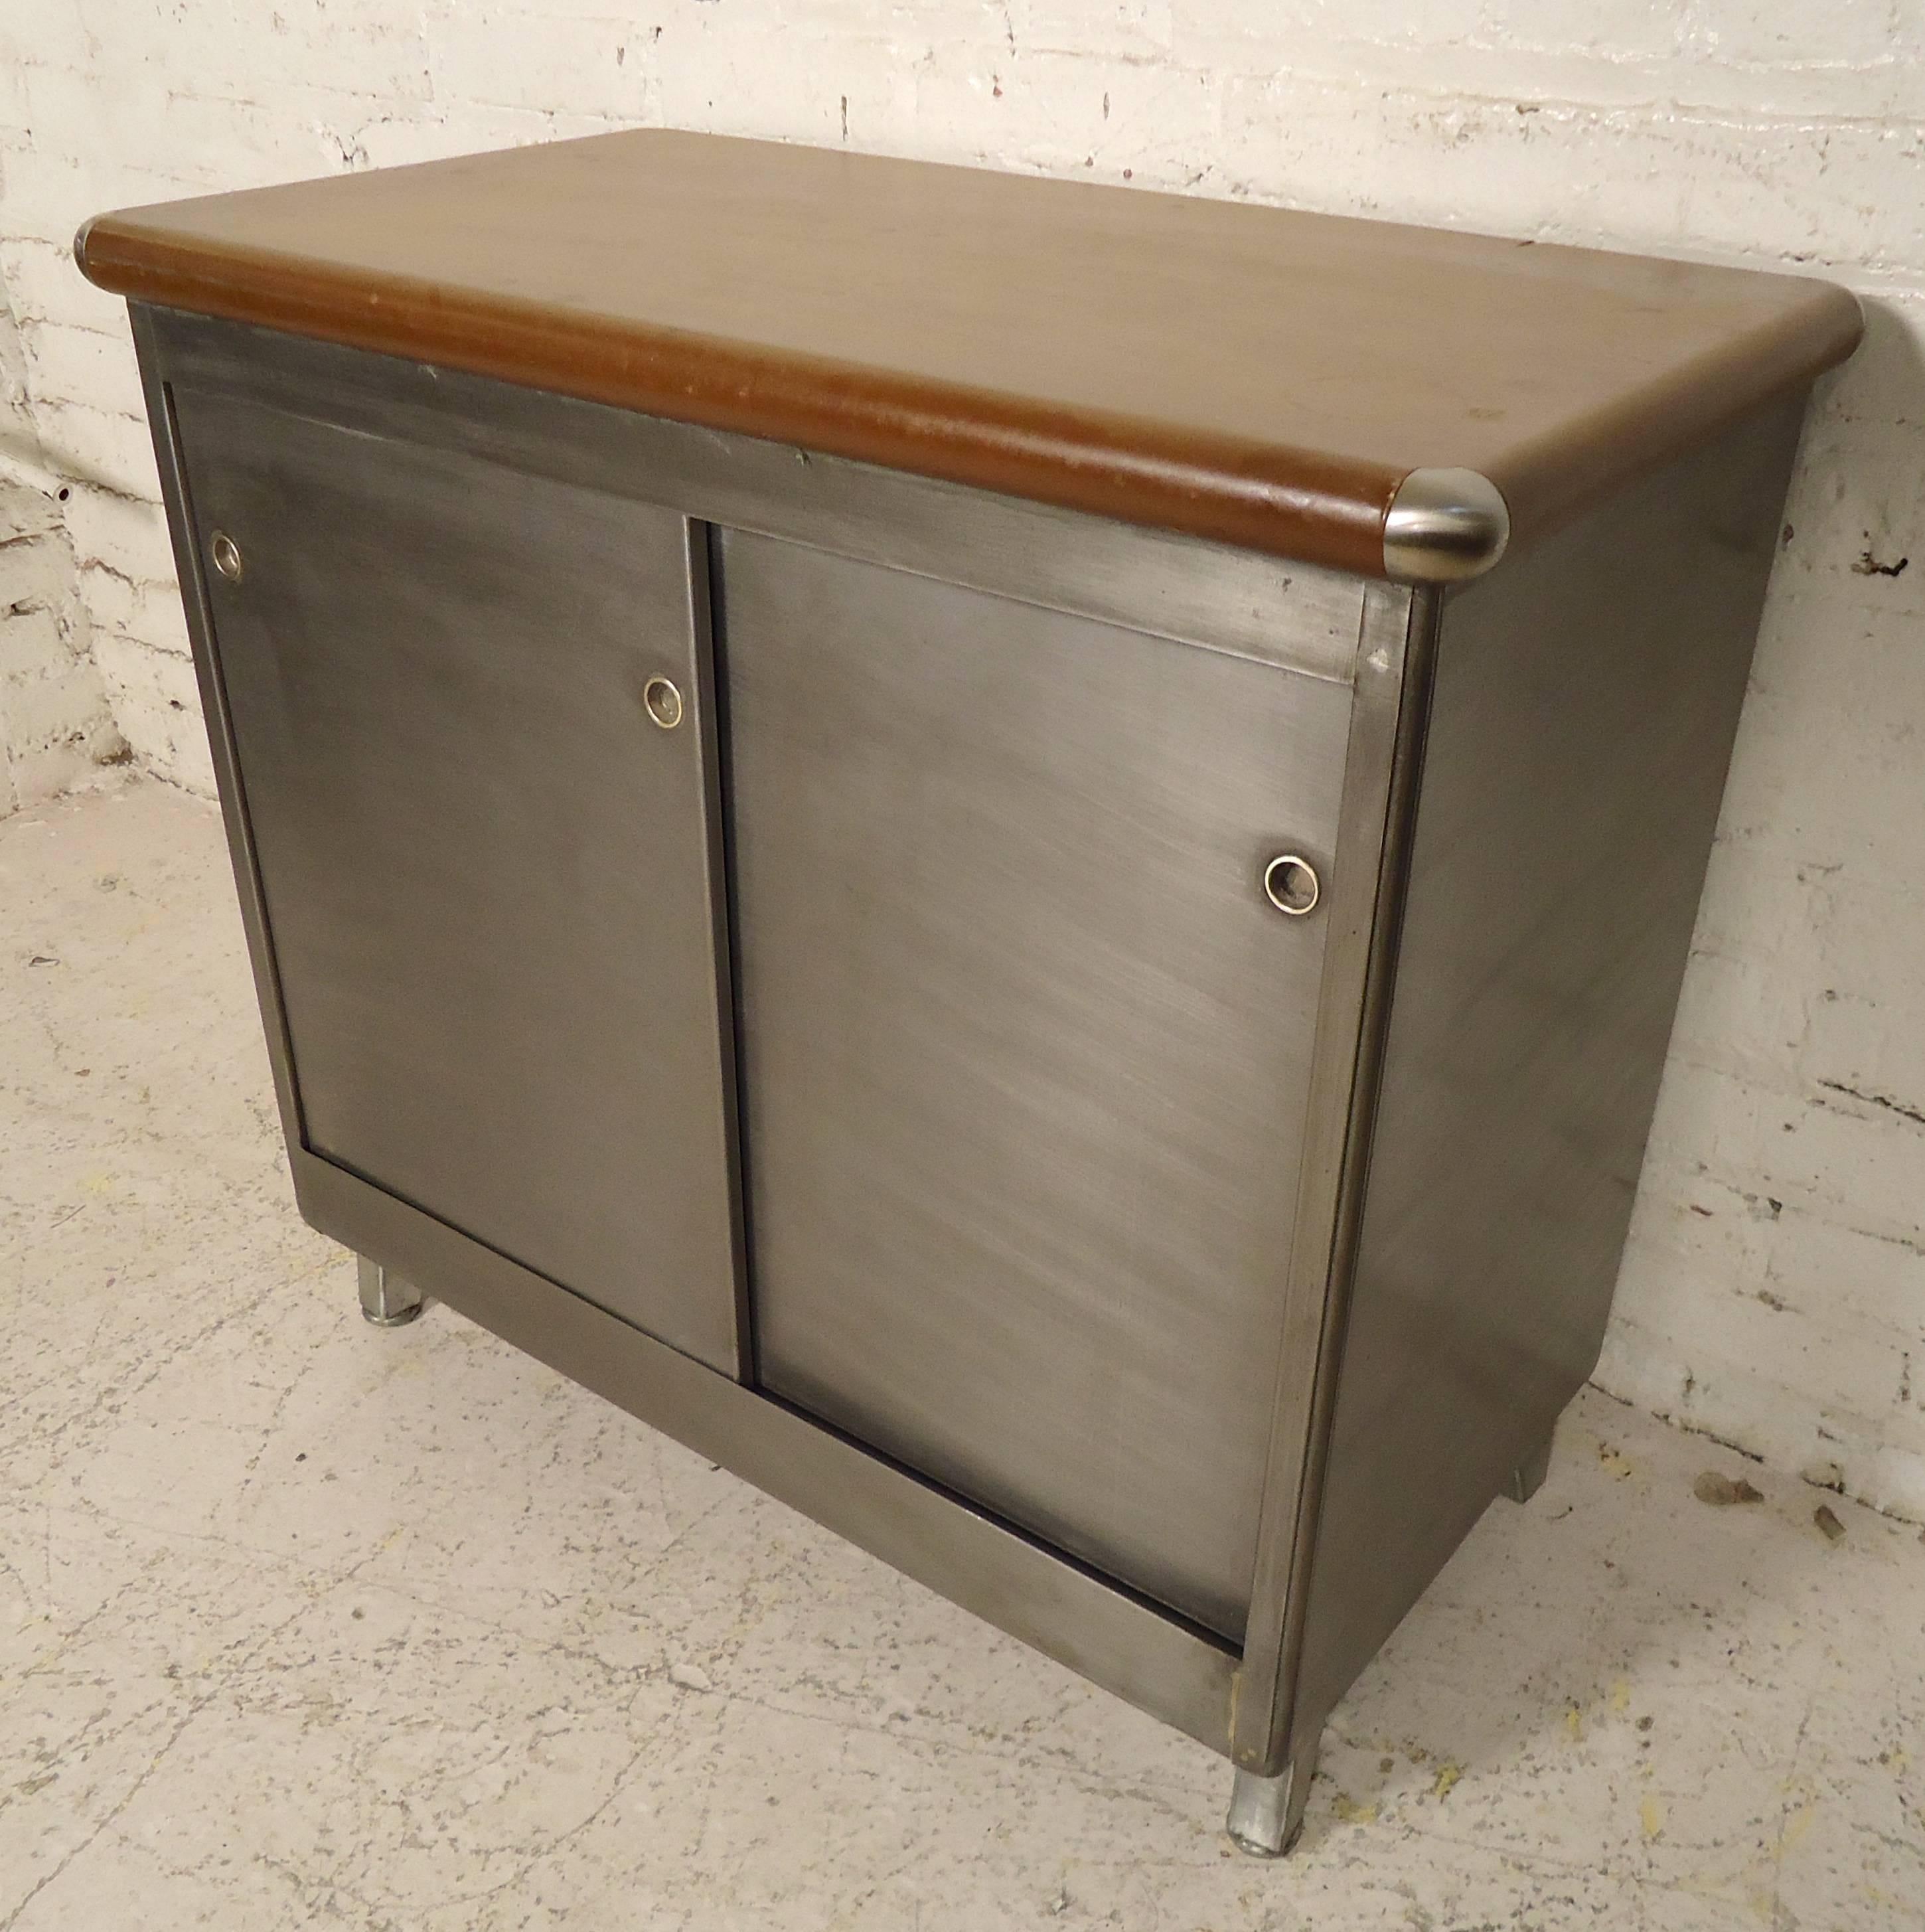 Refinished factory cabinet with vinyl top. Double sliding doors with adjustable shelves.

(Please confirm item location - NY or NJ - with dealer).
     